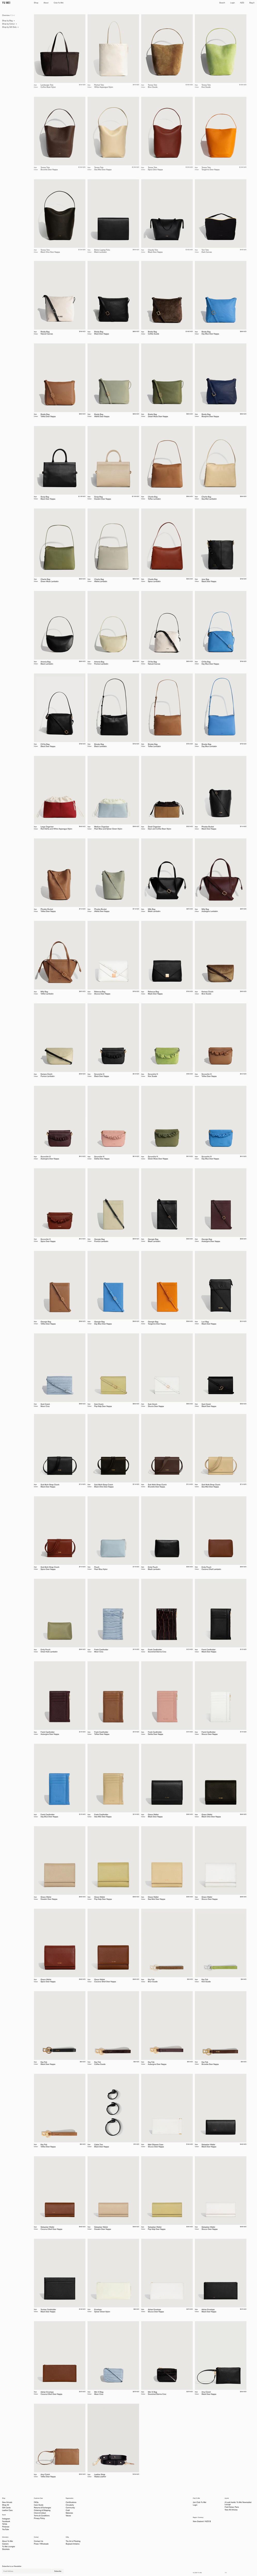 Yu Mei Landing Page Example: Yu Mei is a new-generation leather goods label with a focus on utilitarian design.